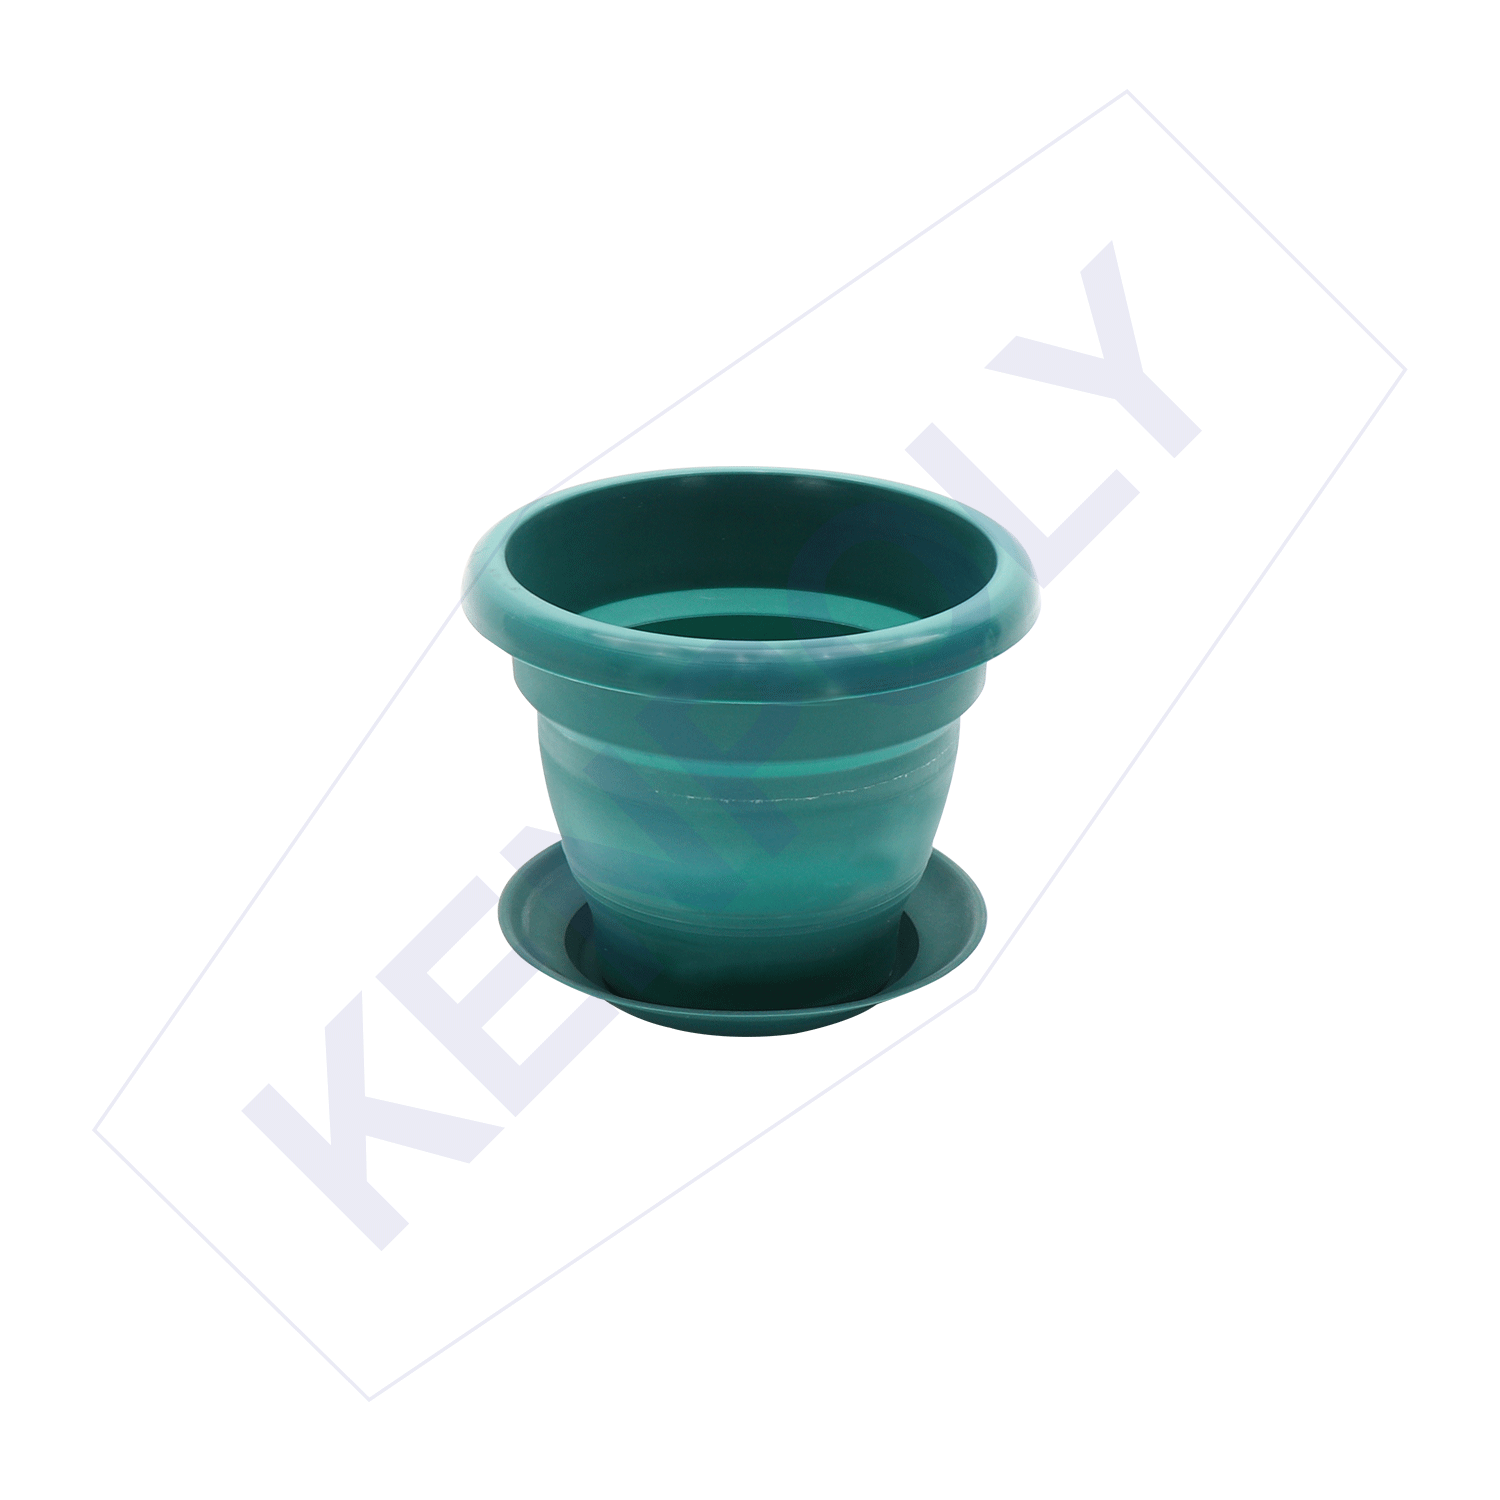 Kenpoly Flower Pot - Planter 3 with Dish 2.5LTRS H165 x Dia203 mm